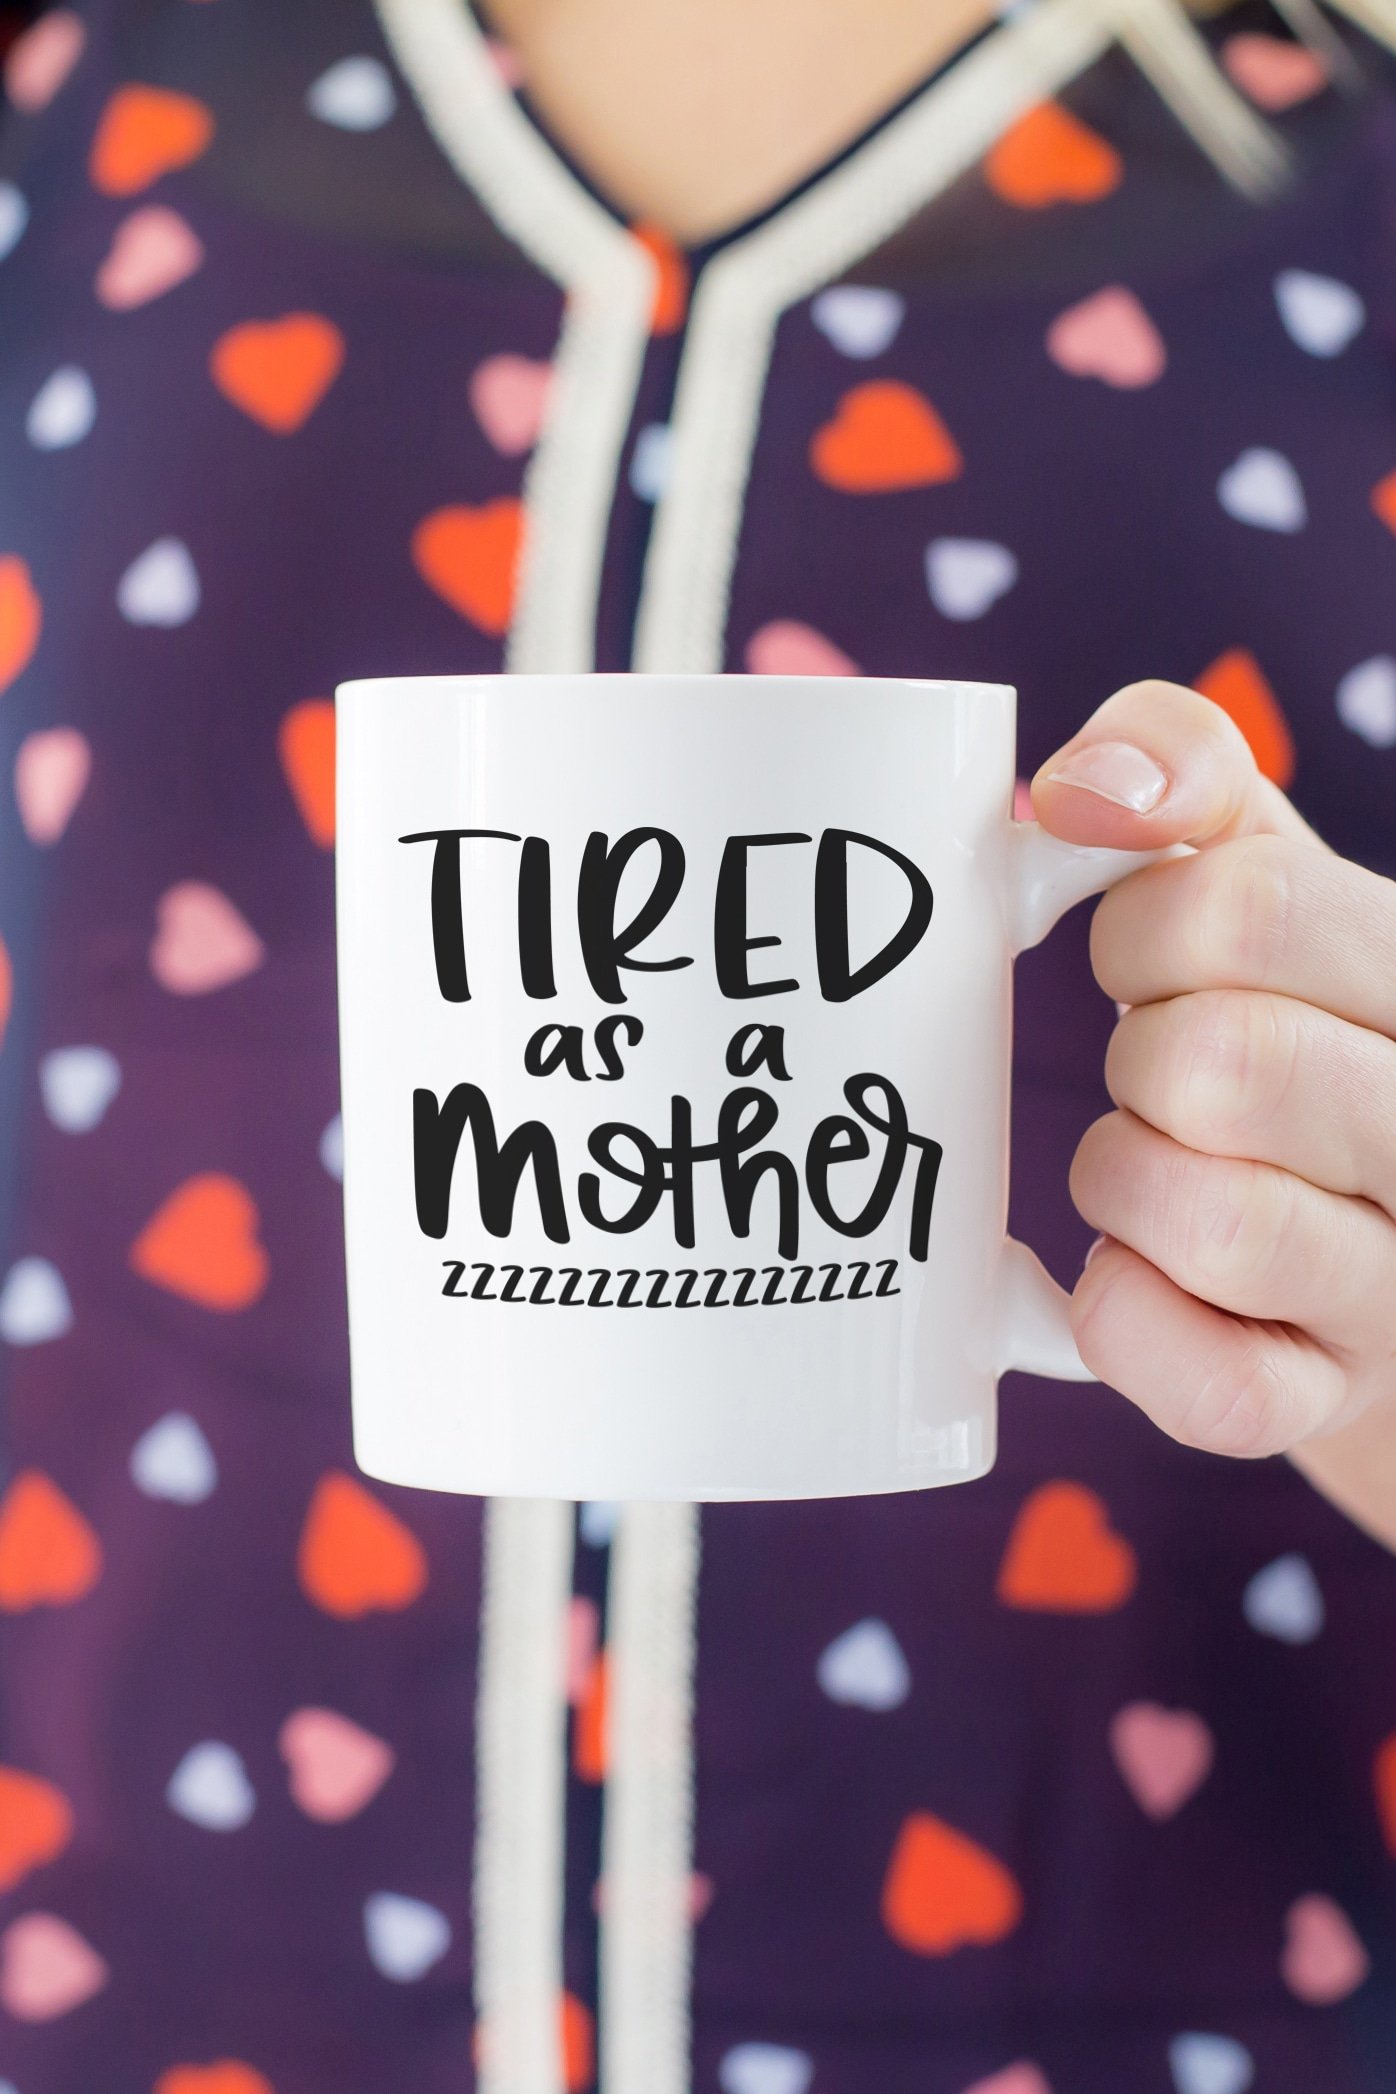 tired as a mother svg file on mug being held